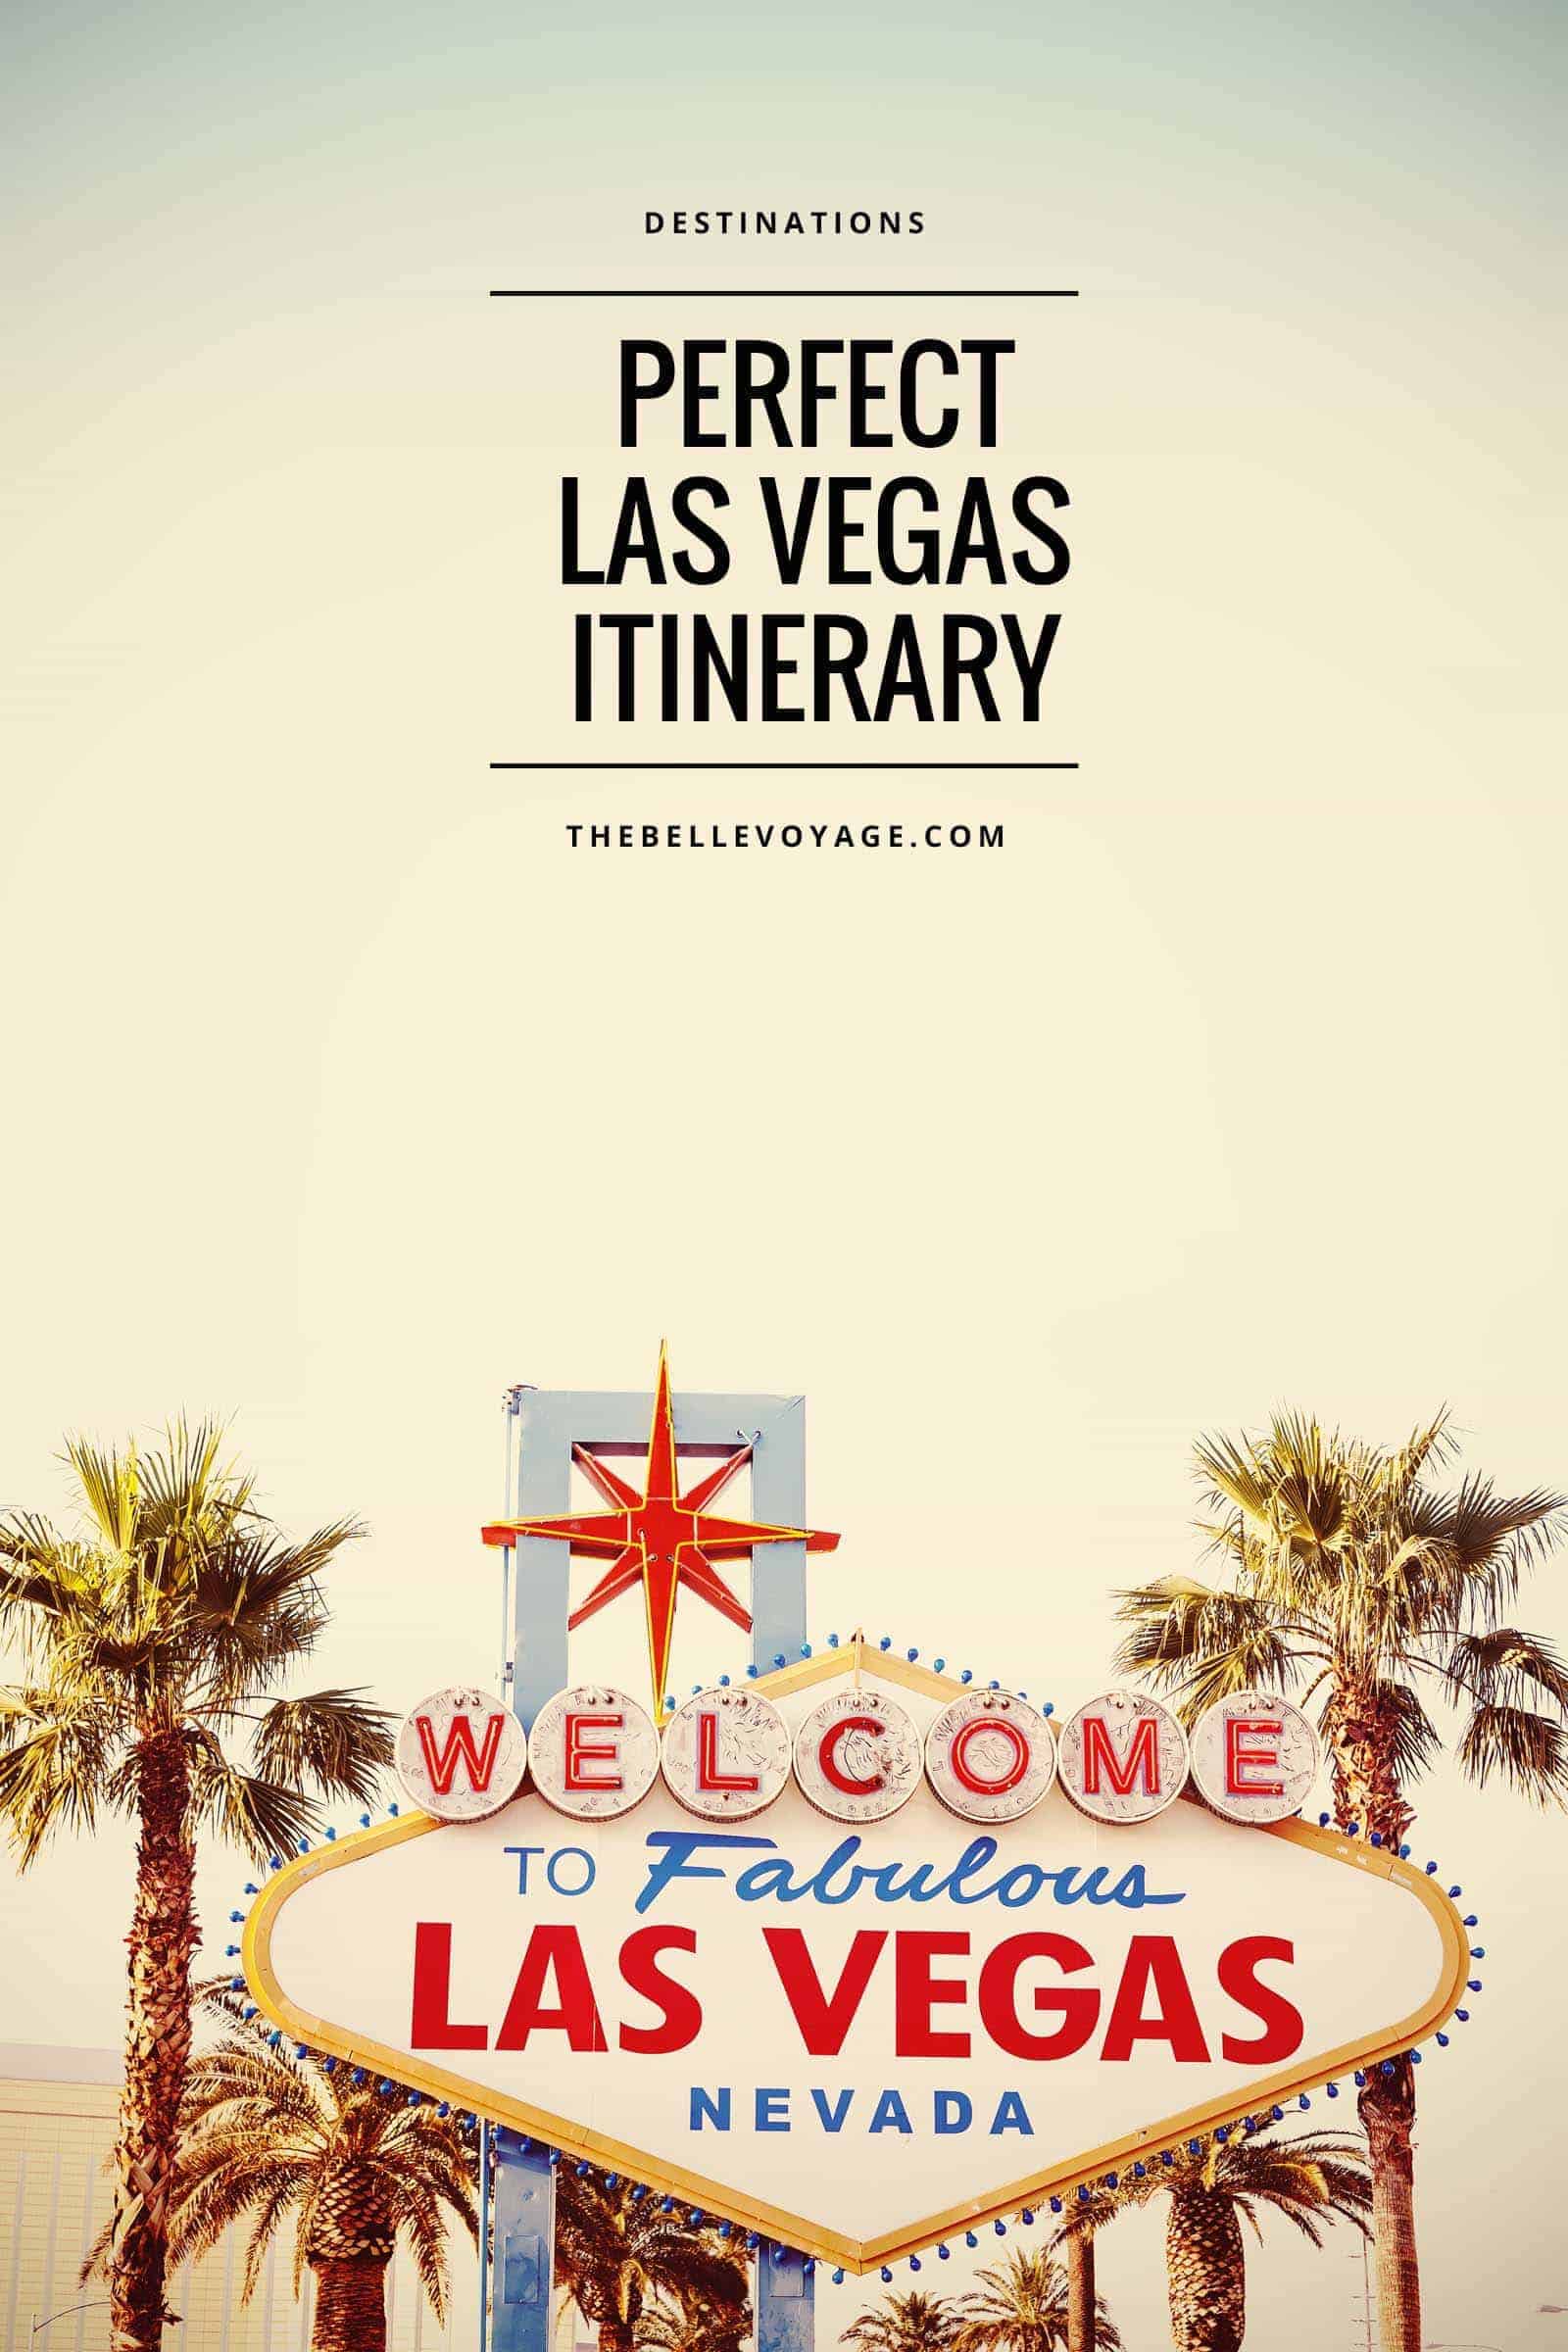 Las Vegas Itinerary - 7 Days in Sin City (And Beyond) - TRAVELTIPSTER -  Travel Ideas, Itinerary and Travel Tips